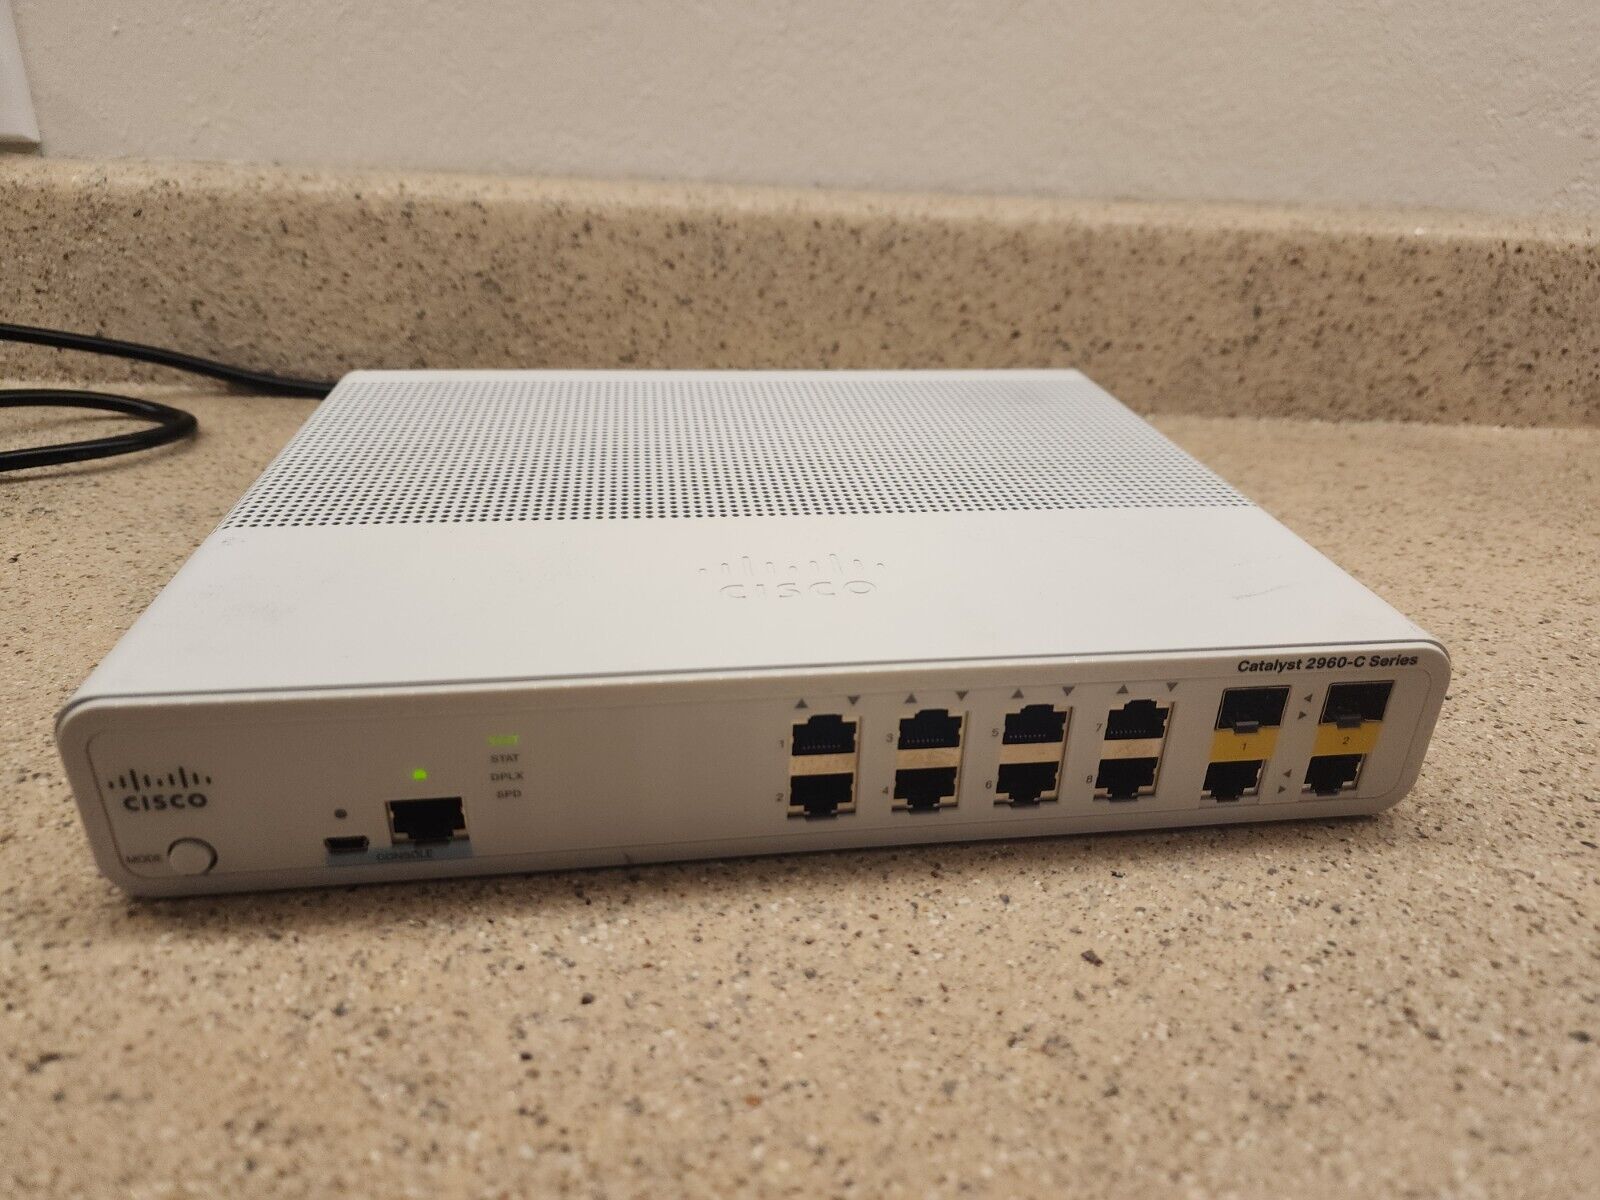 Cisco WS-C2960C-8TC-L 8 Port Fast Ethernet Compact Switch w/ Power Cable